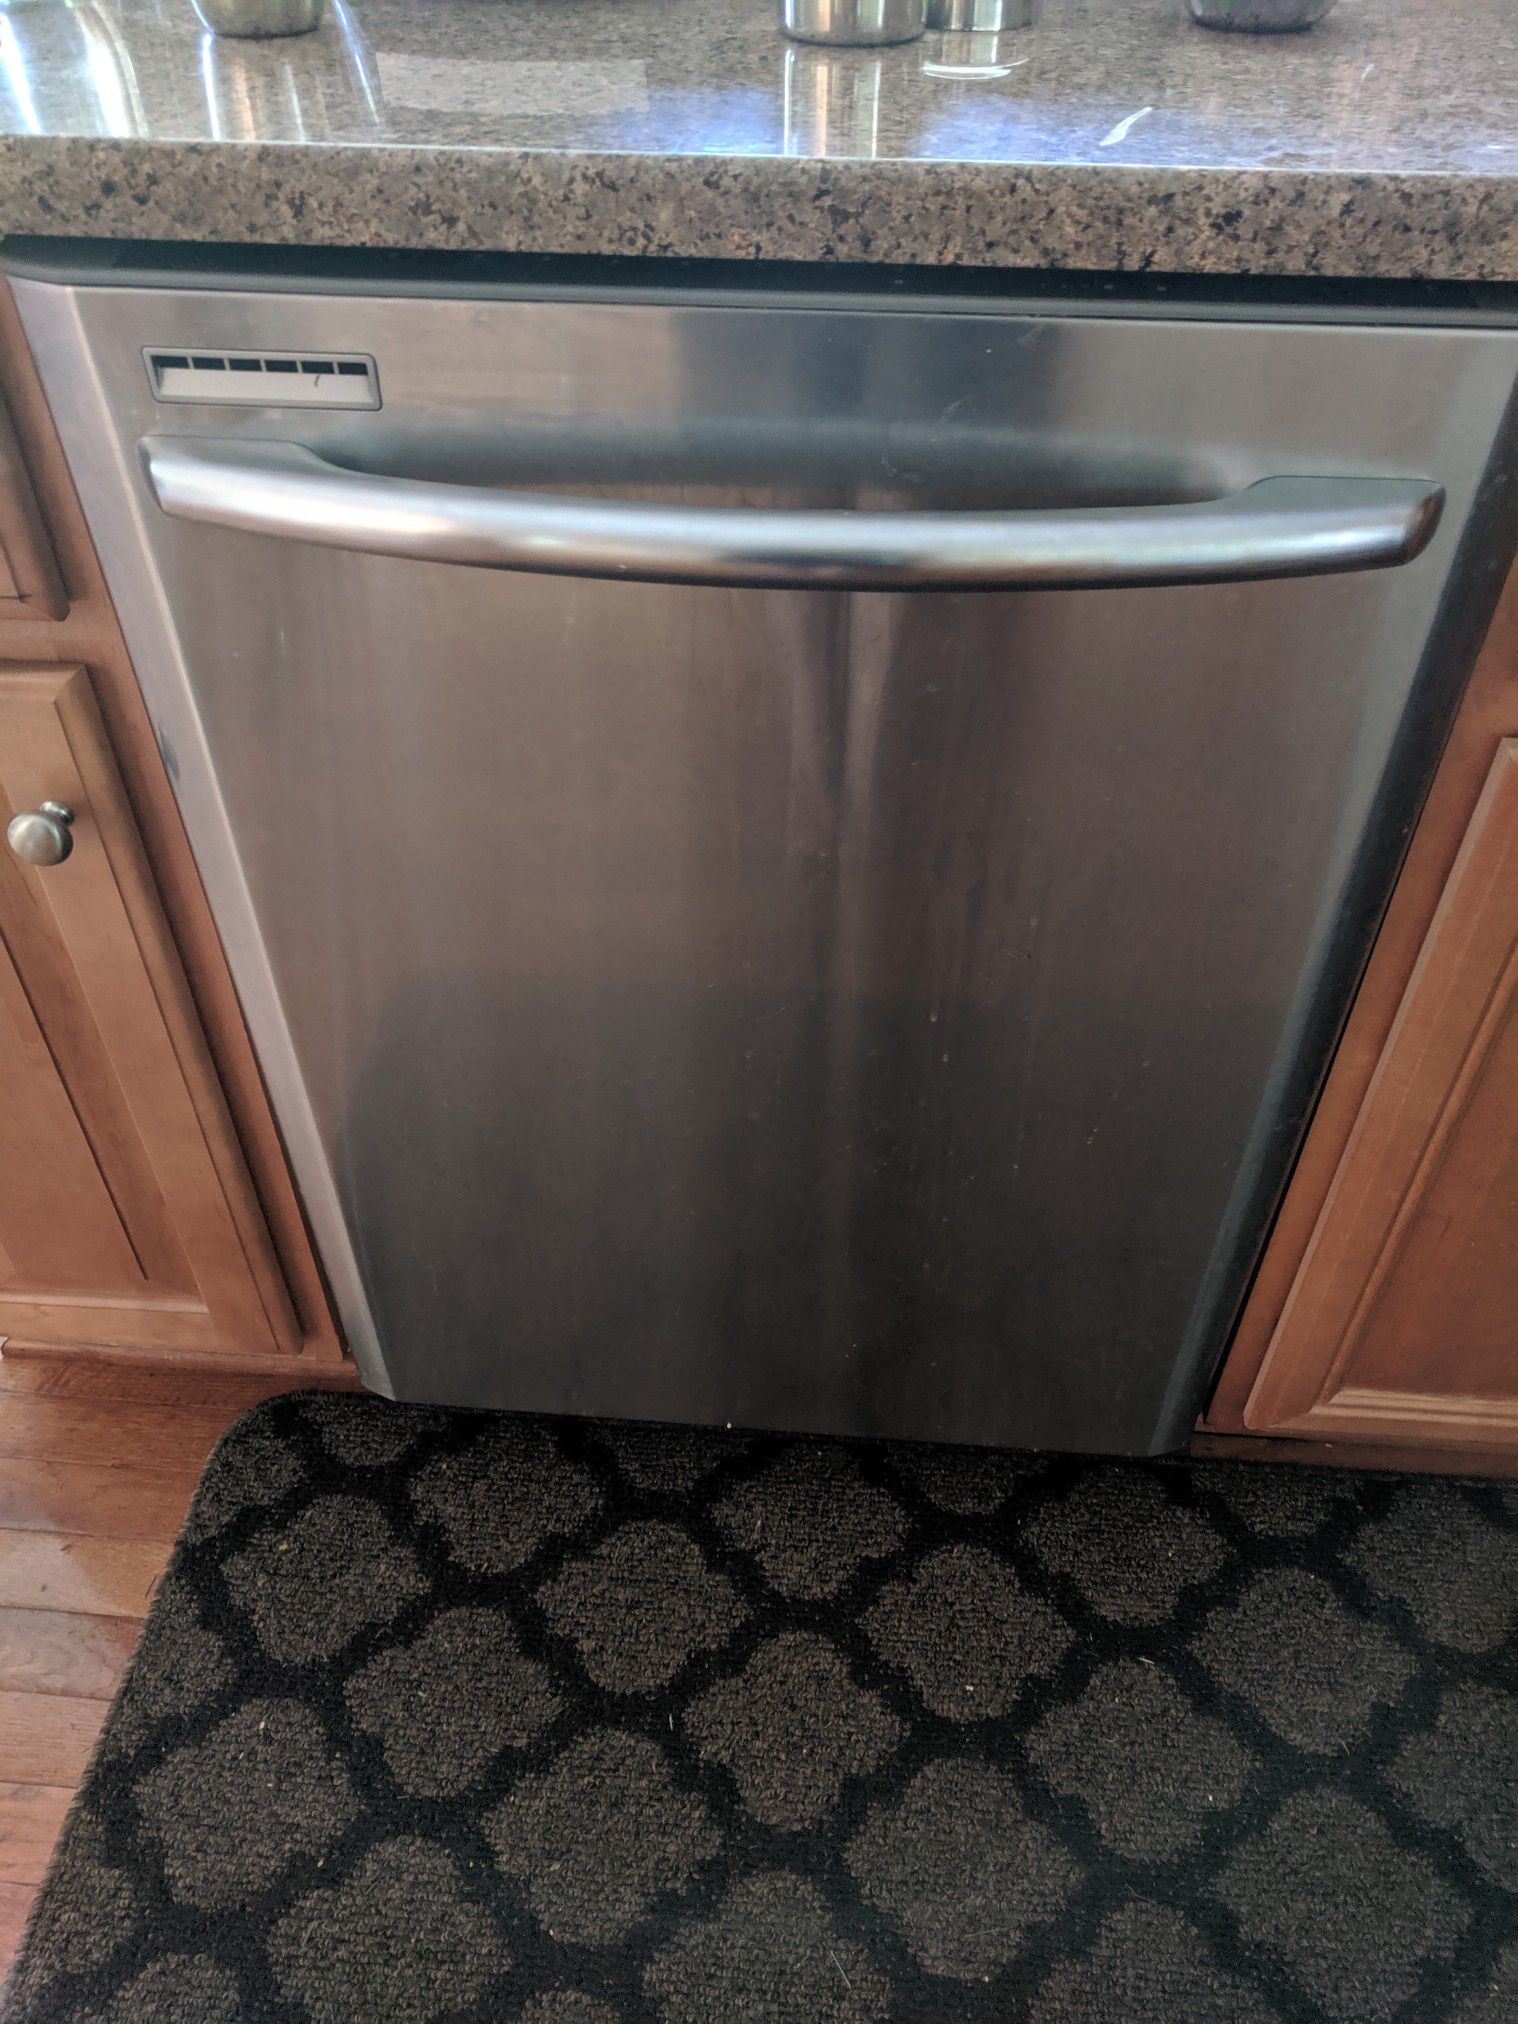 Maytag dishwasher stainless steel works well.obo